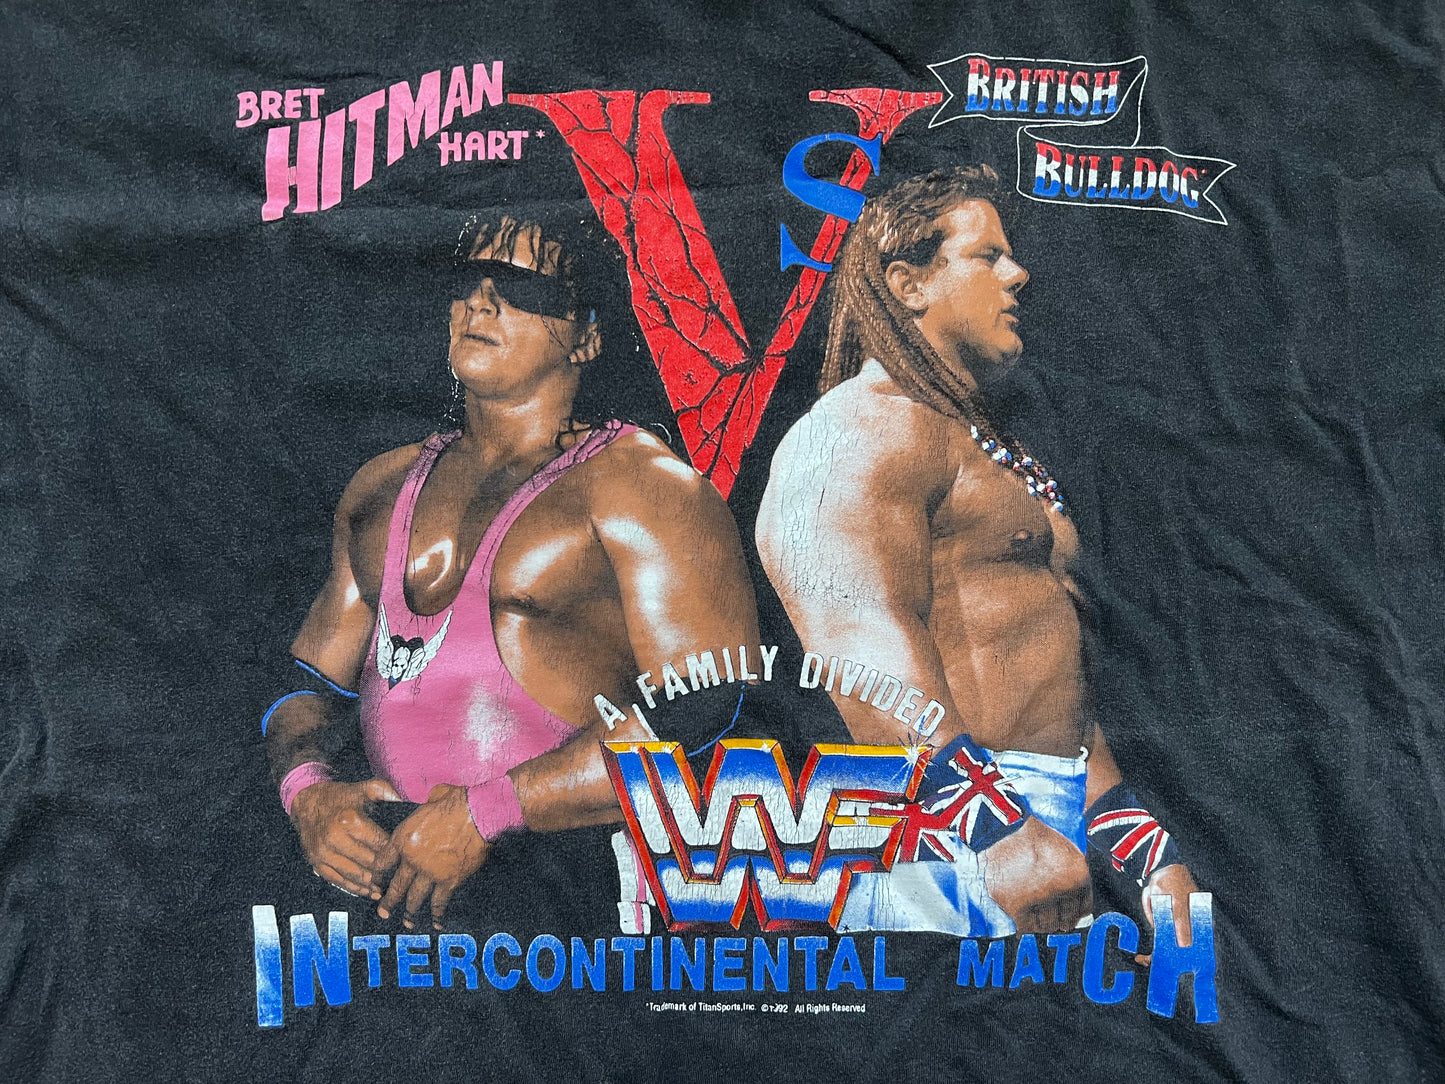 1992 WWF Summerslam two sided shirt featuring Bret “The Hitman” Hart and “The British Bulldog” Davey Boy Smith